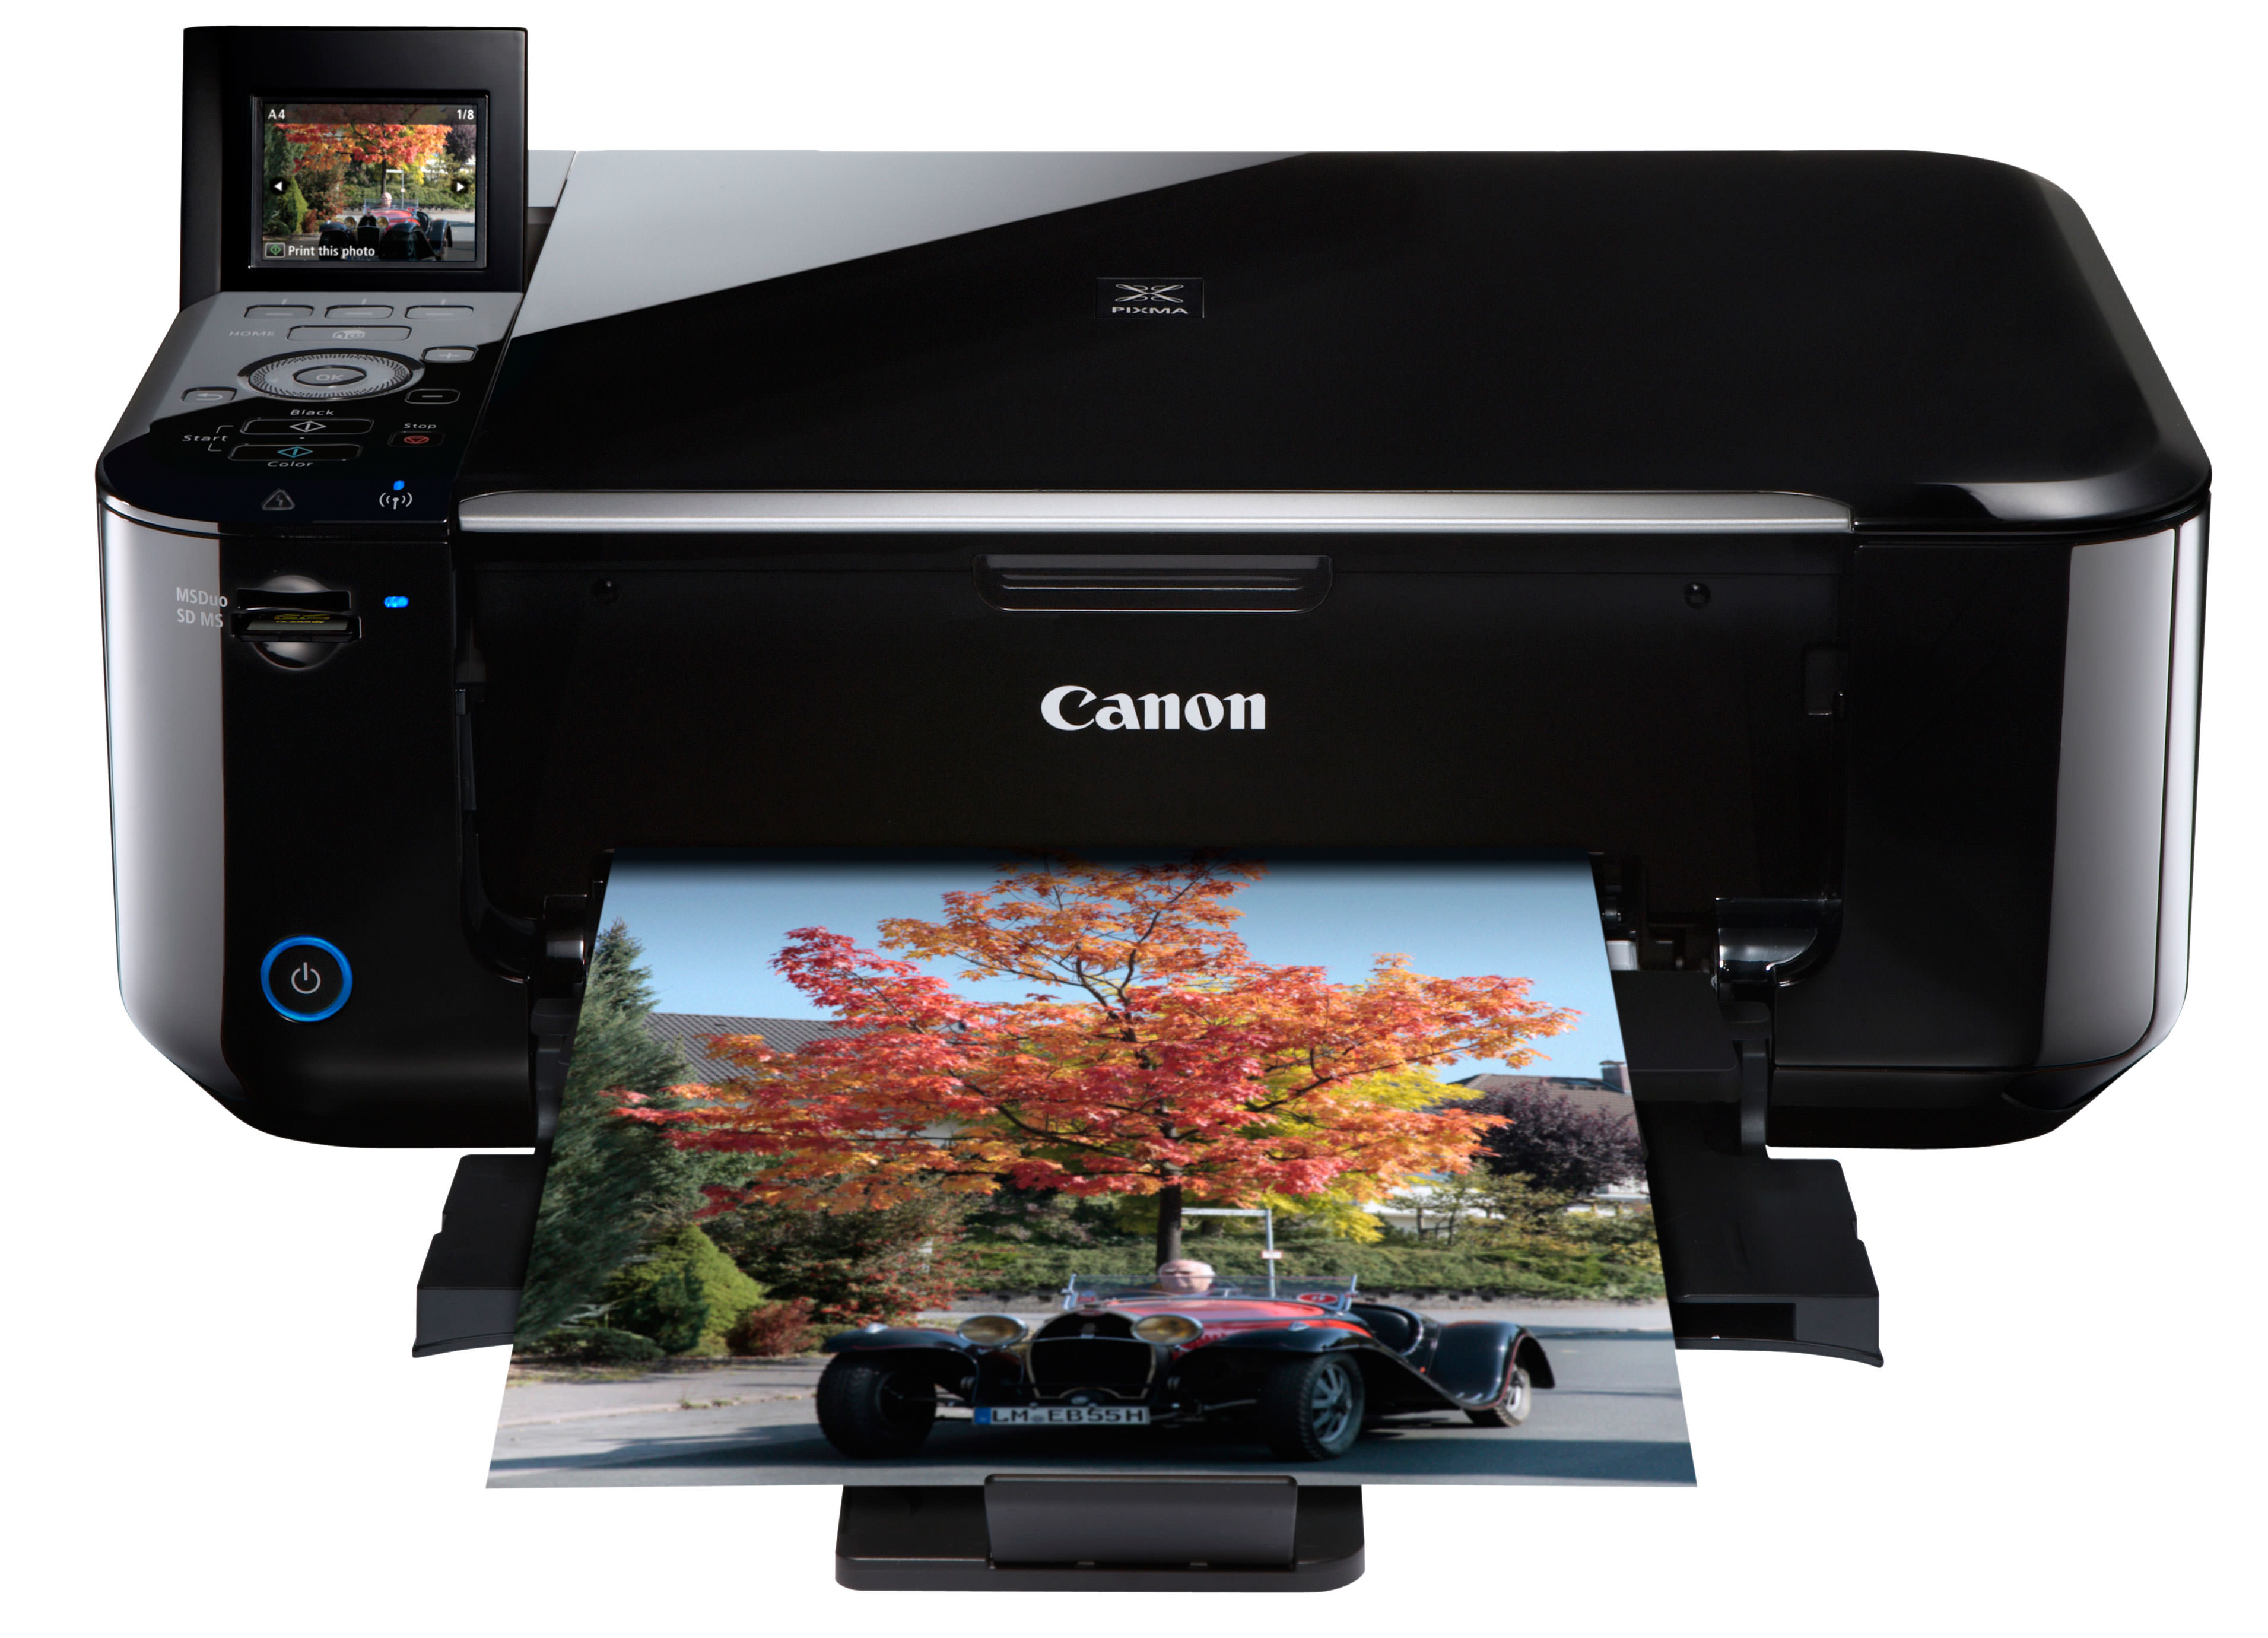 Common Issues with Canon Printers and How to Fix Them